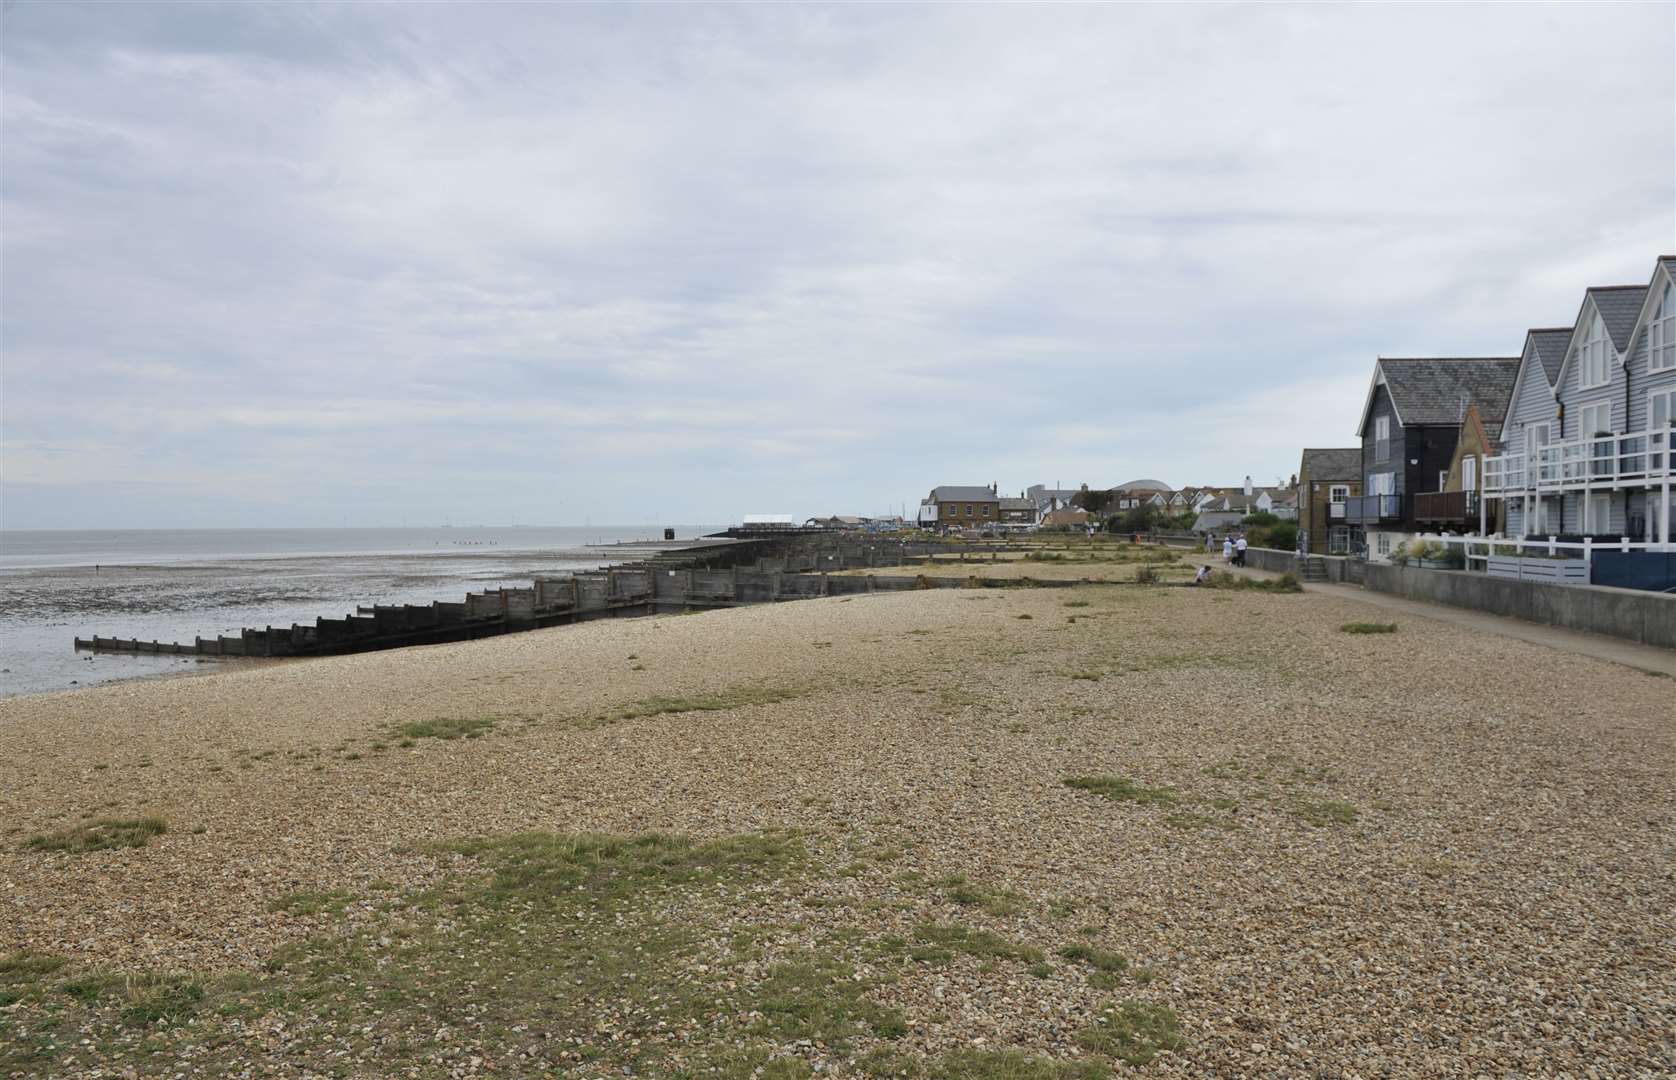 It is hoped crowds will stay away from beaches at Whitstable and elsewhere in Kent this Easter weekend